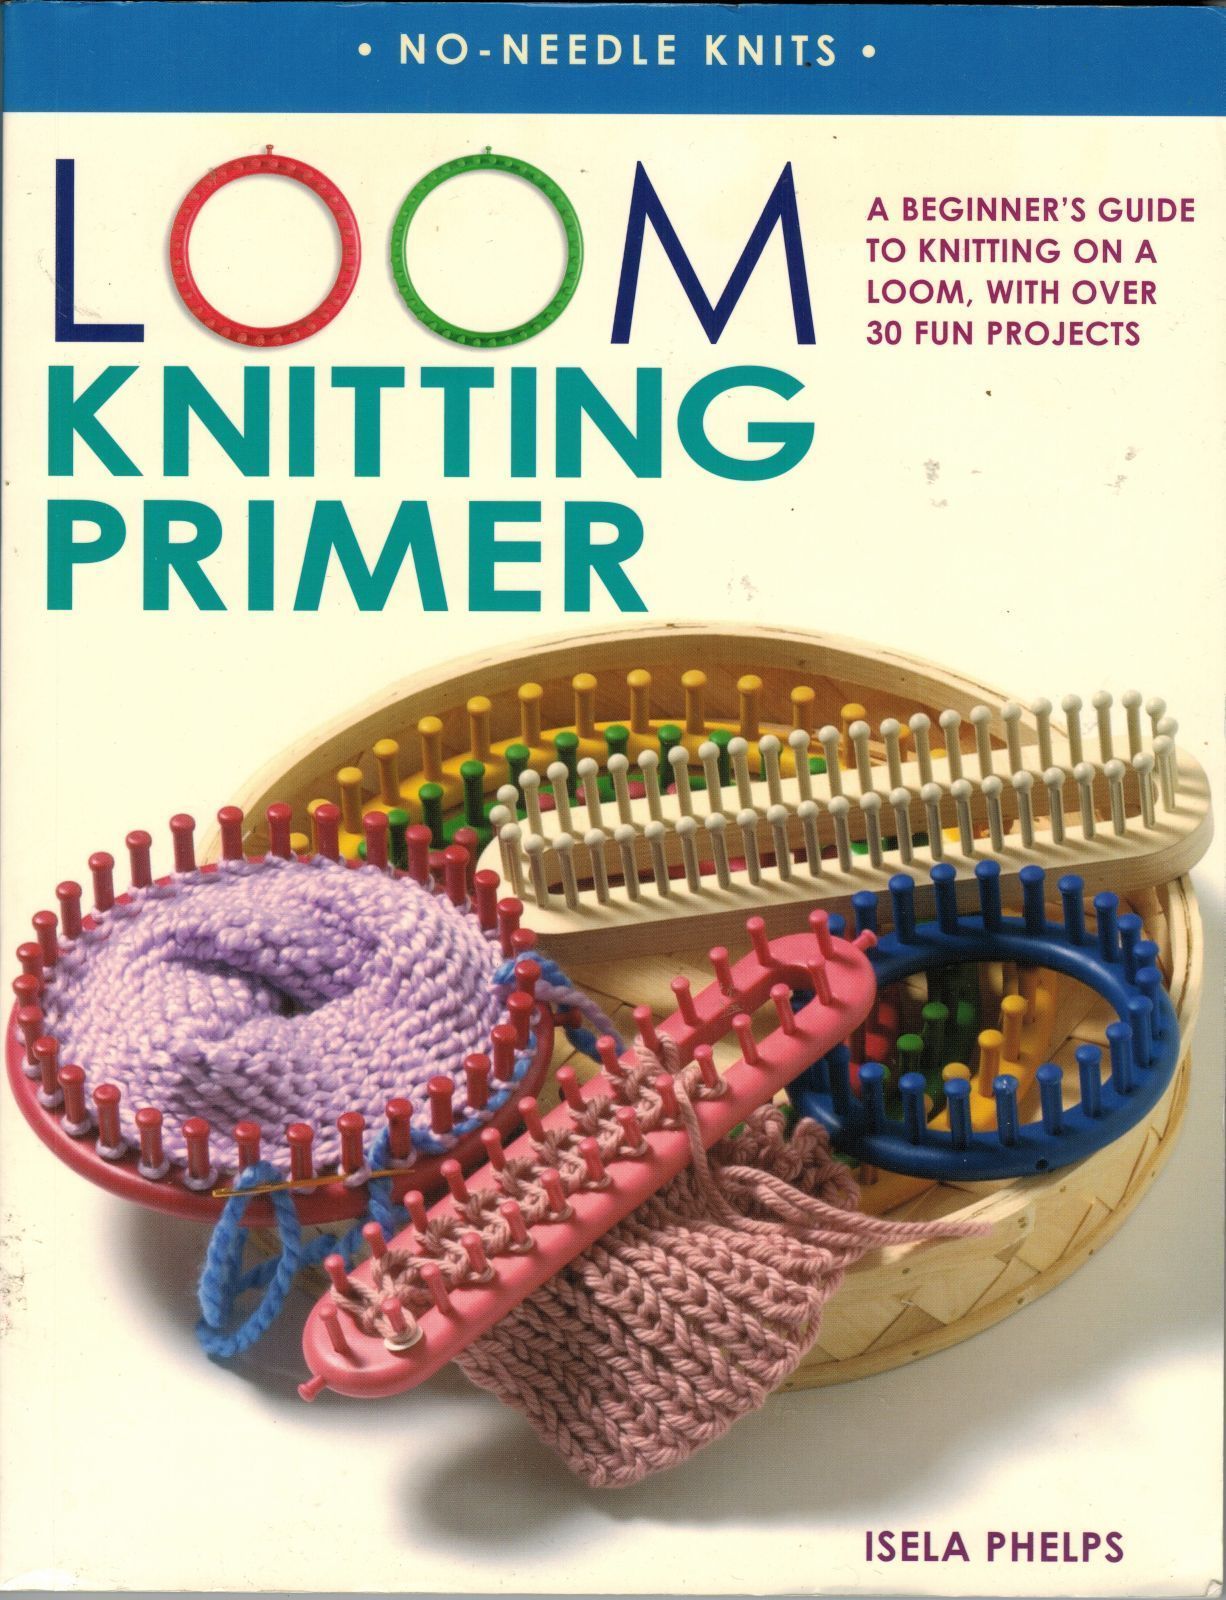 30 Projects Loom Knitting Primer Beginner's Guide No Needle Knits Pattern Book Patterns